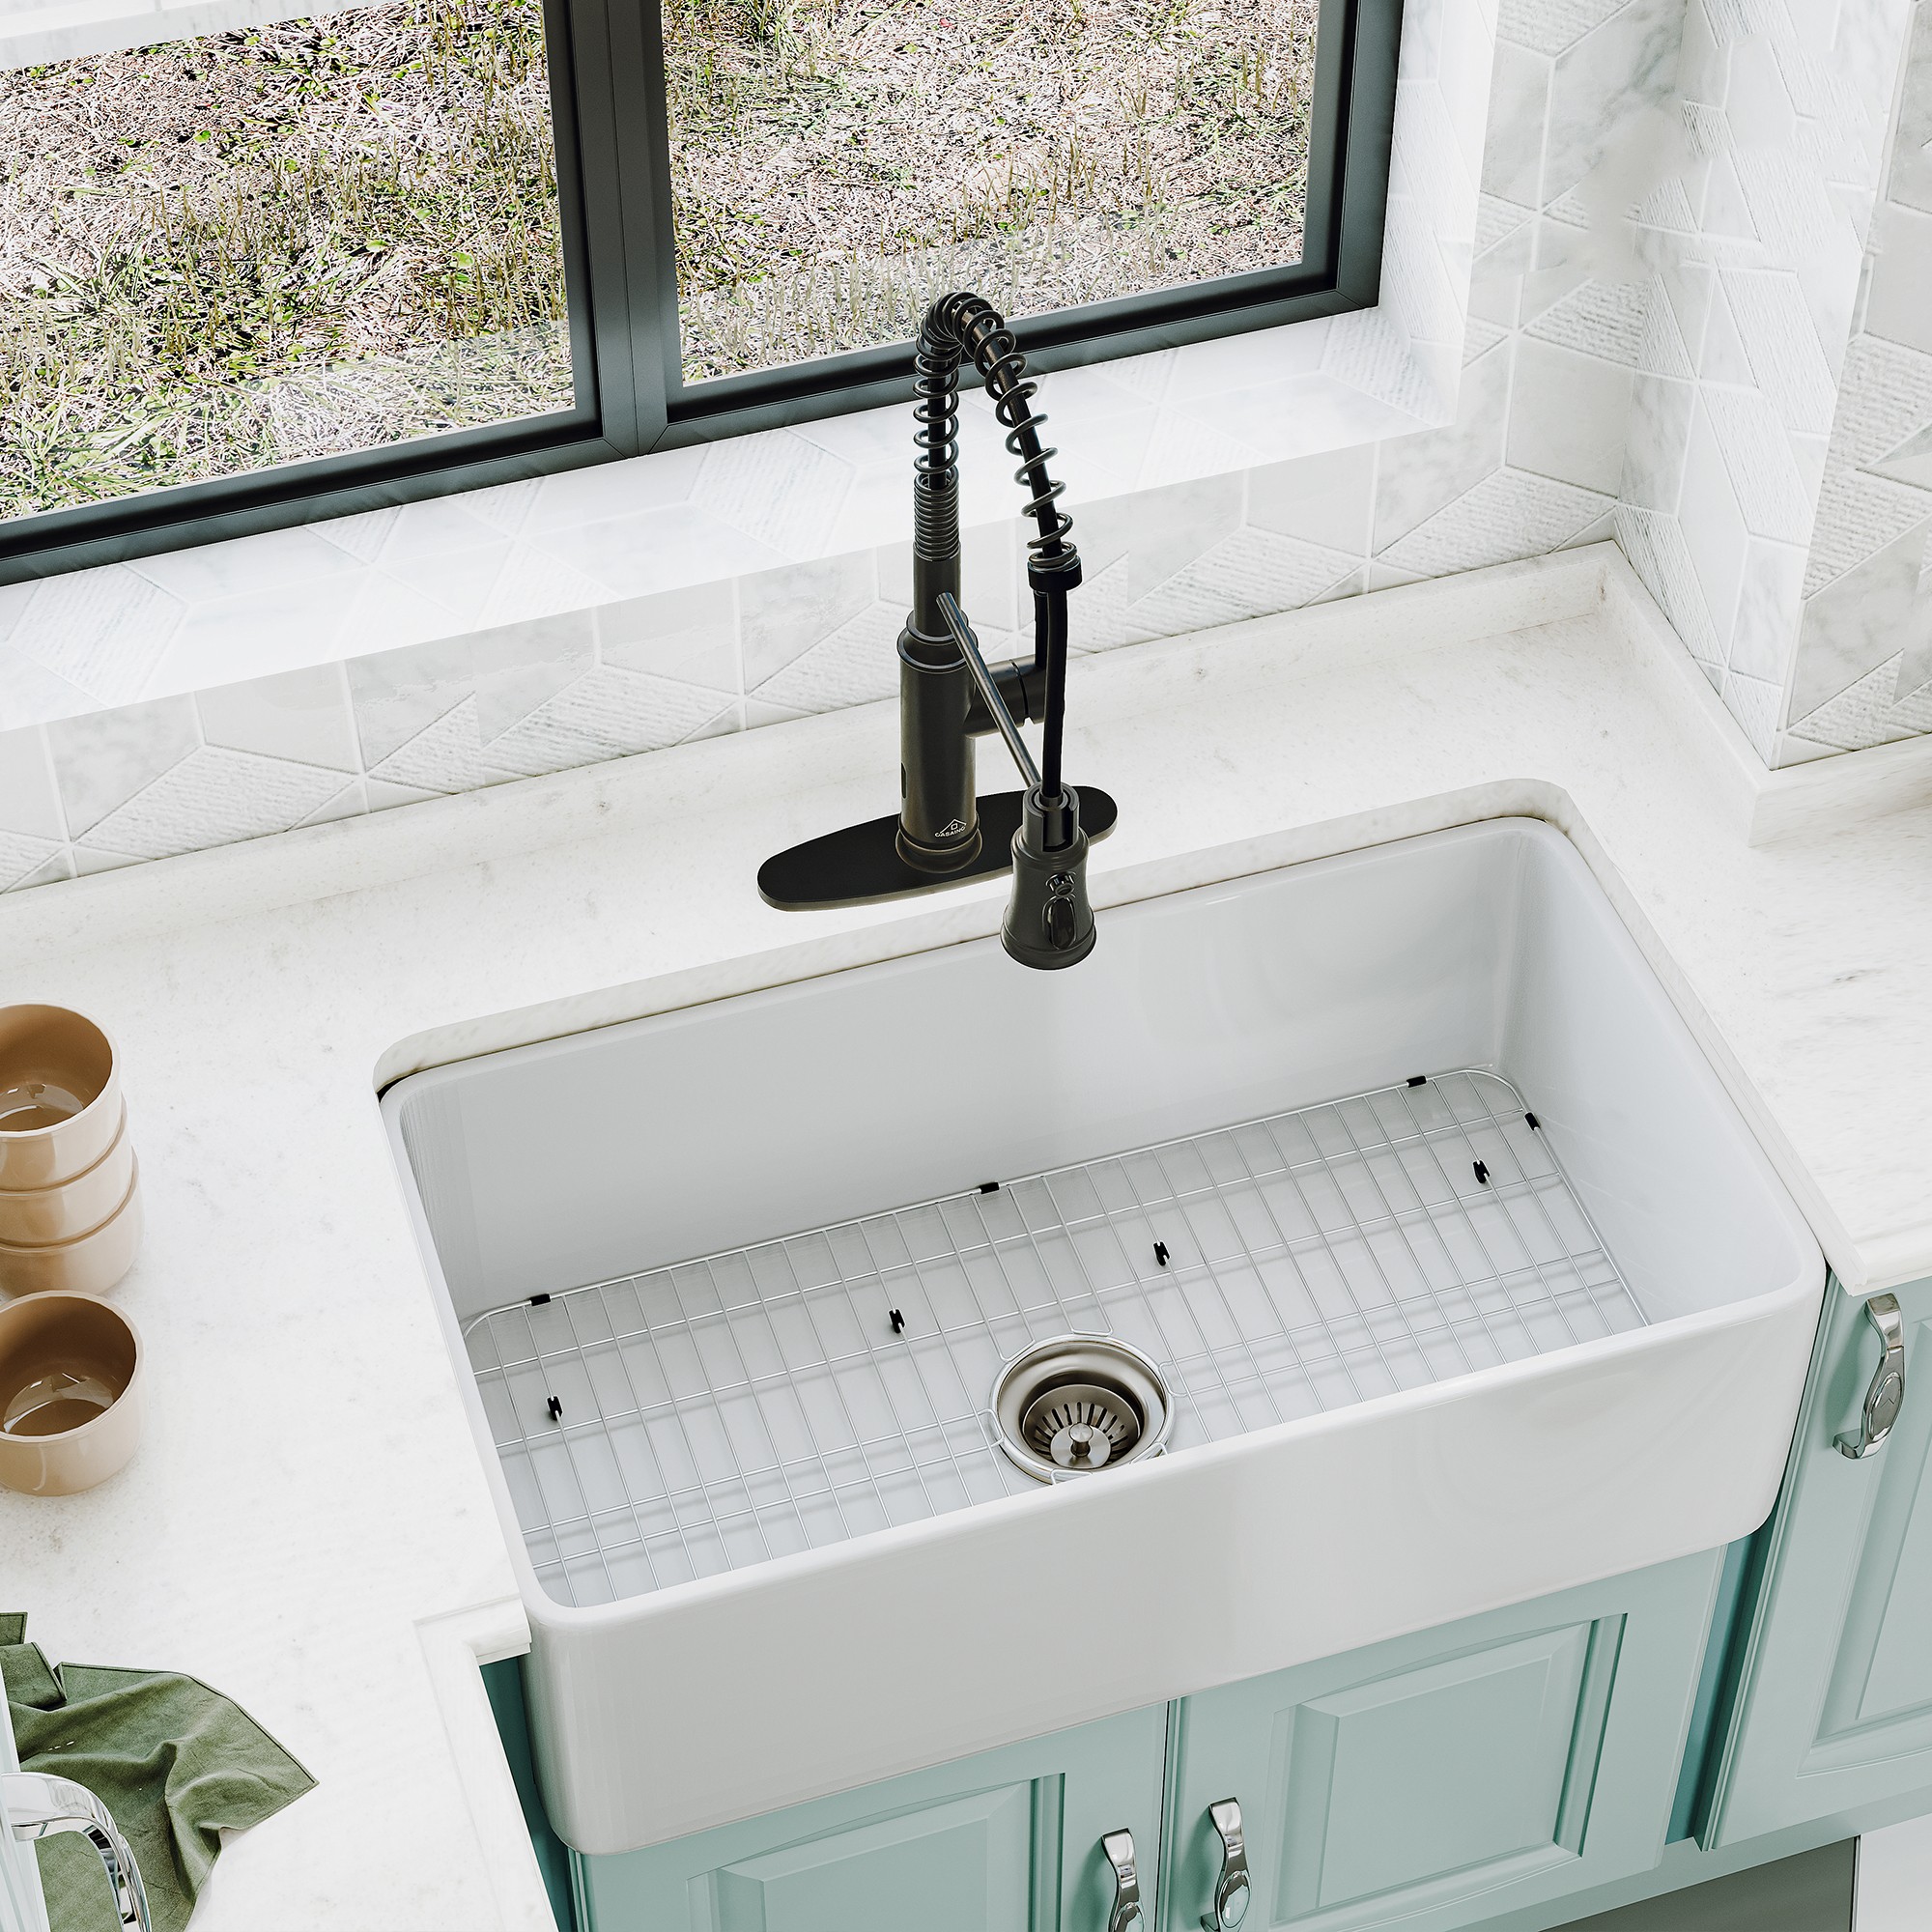 Fireclay 30 in. Single Bowl Farmhouse Apron Kitchen Sink with Bottom Grid and Strainers With cUPC Certified, in Glossy White/Matte Black/Matte Gray